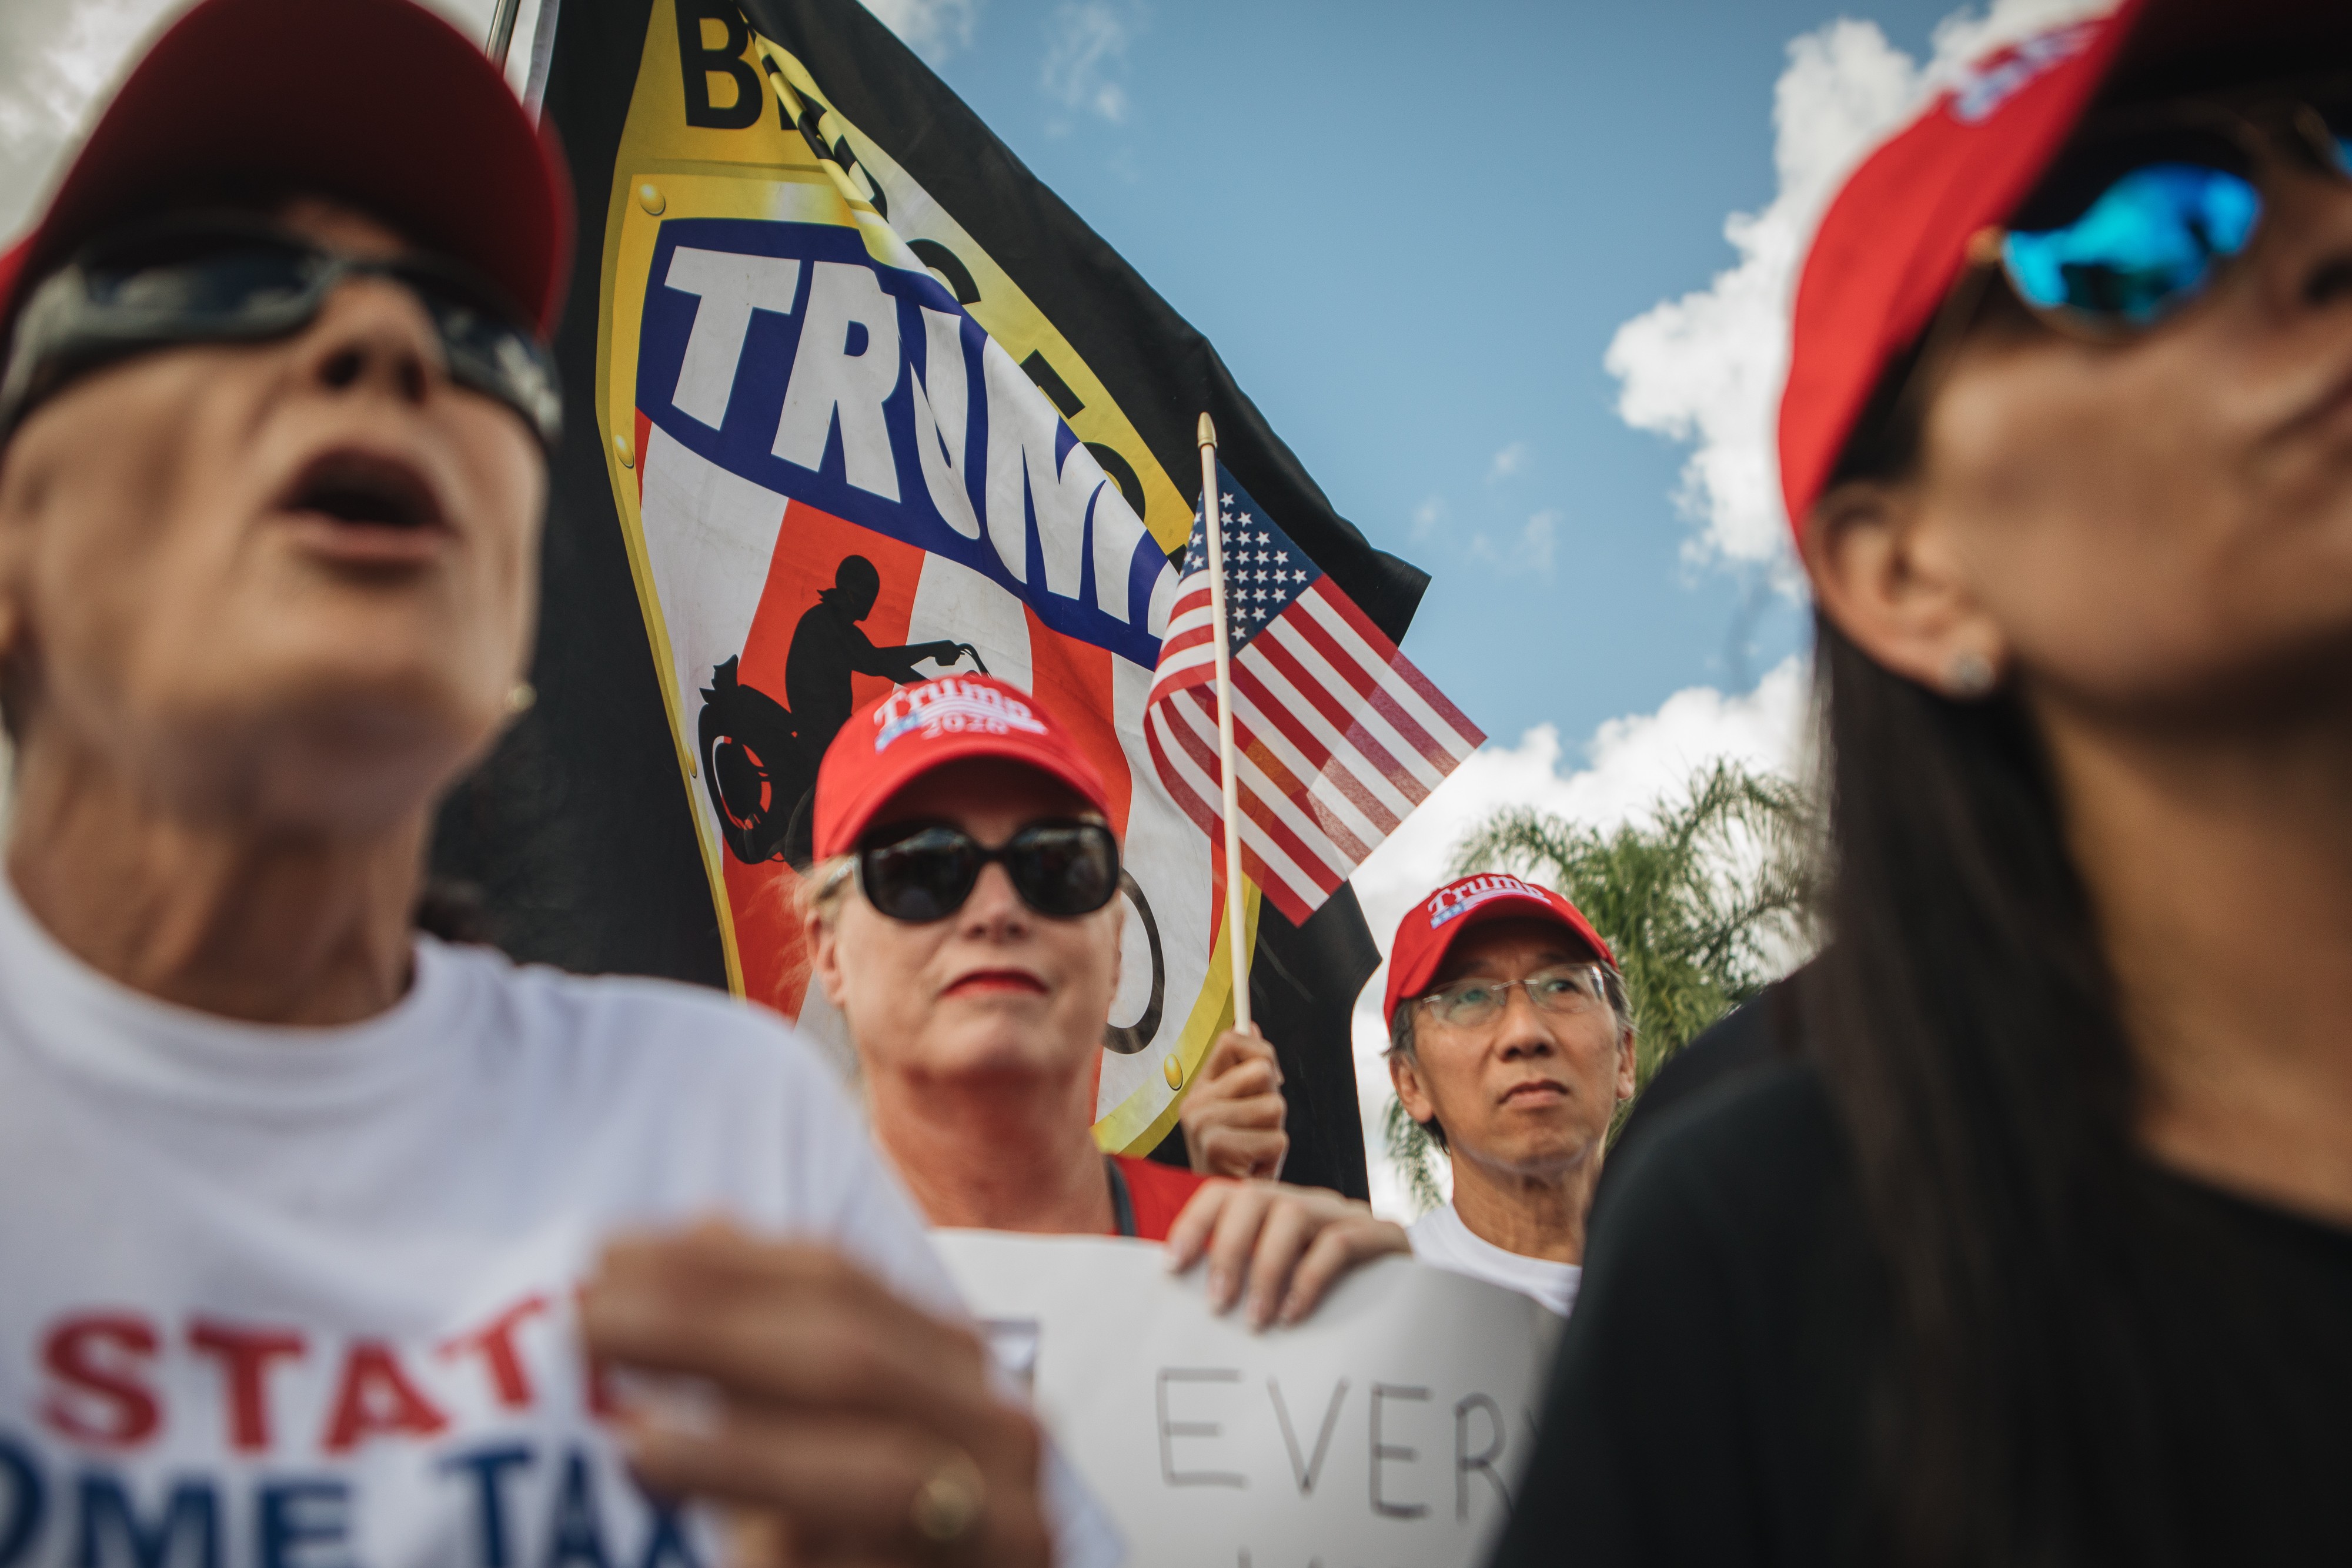 Supporters of US President Donald Trump protest outside the Broward County Supervisor of Elections office in Lauderhill, Florida, on Monday18. Florida's Senate and governor's races have gone to a recount that will decide two key offices in the largest US swing state, setting off outcries from Republicans led by Trump and Rick Scott, the state's governor now vying to be a US Senator. Photo: Bloomberg